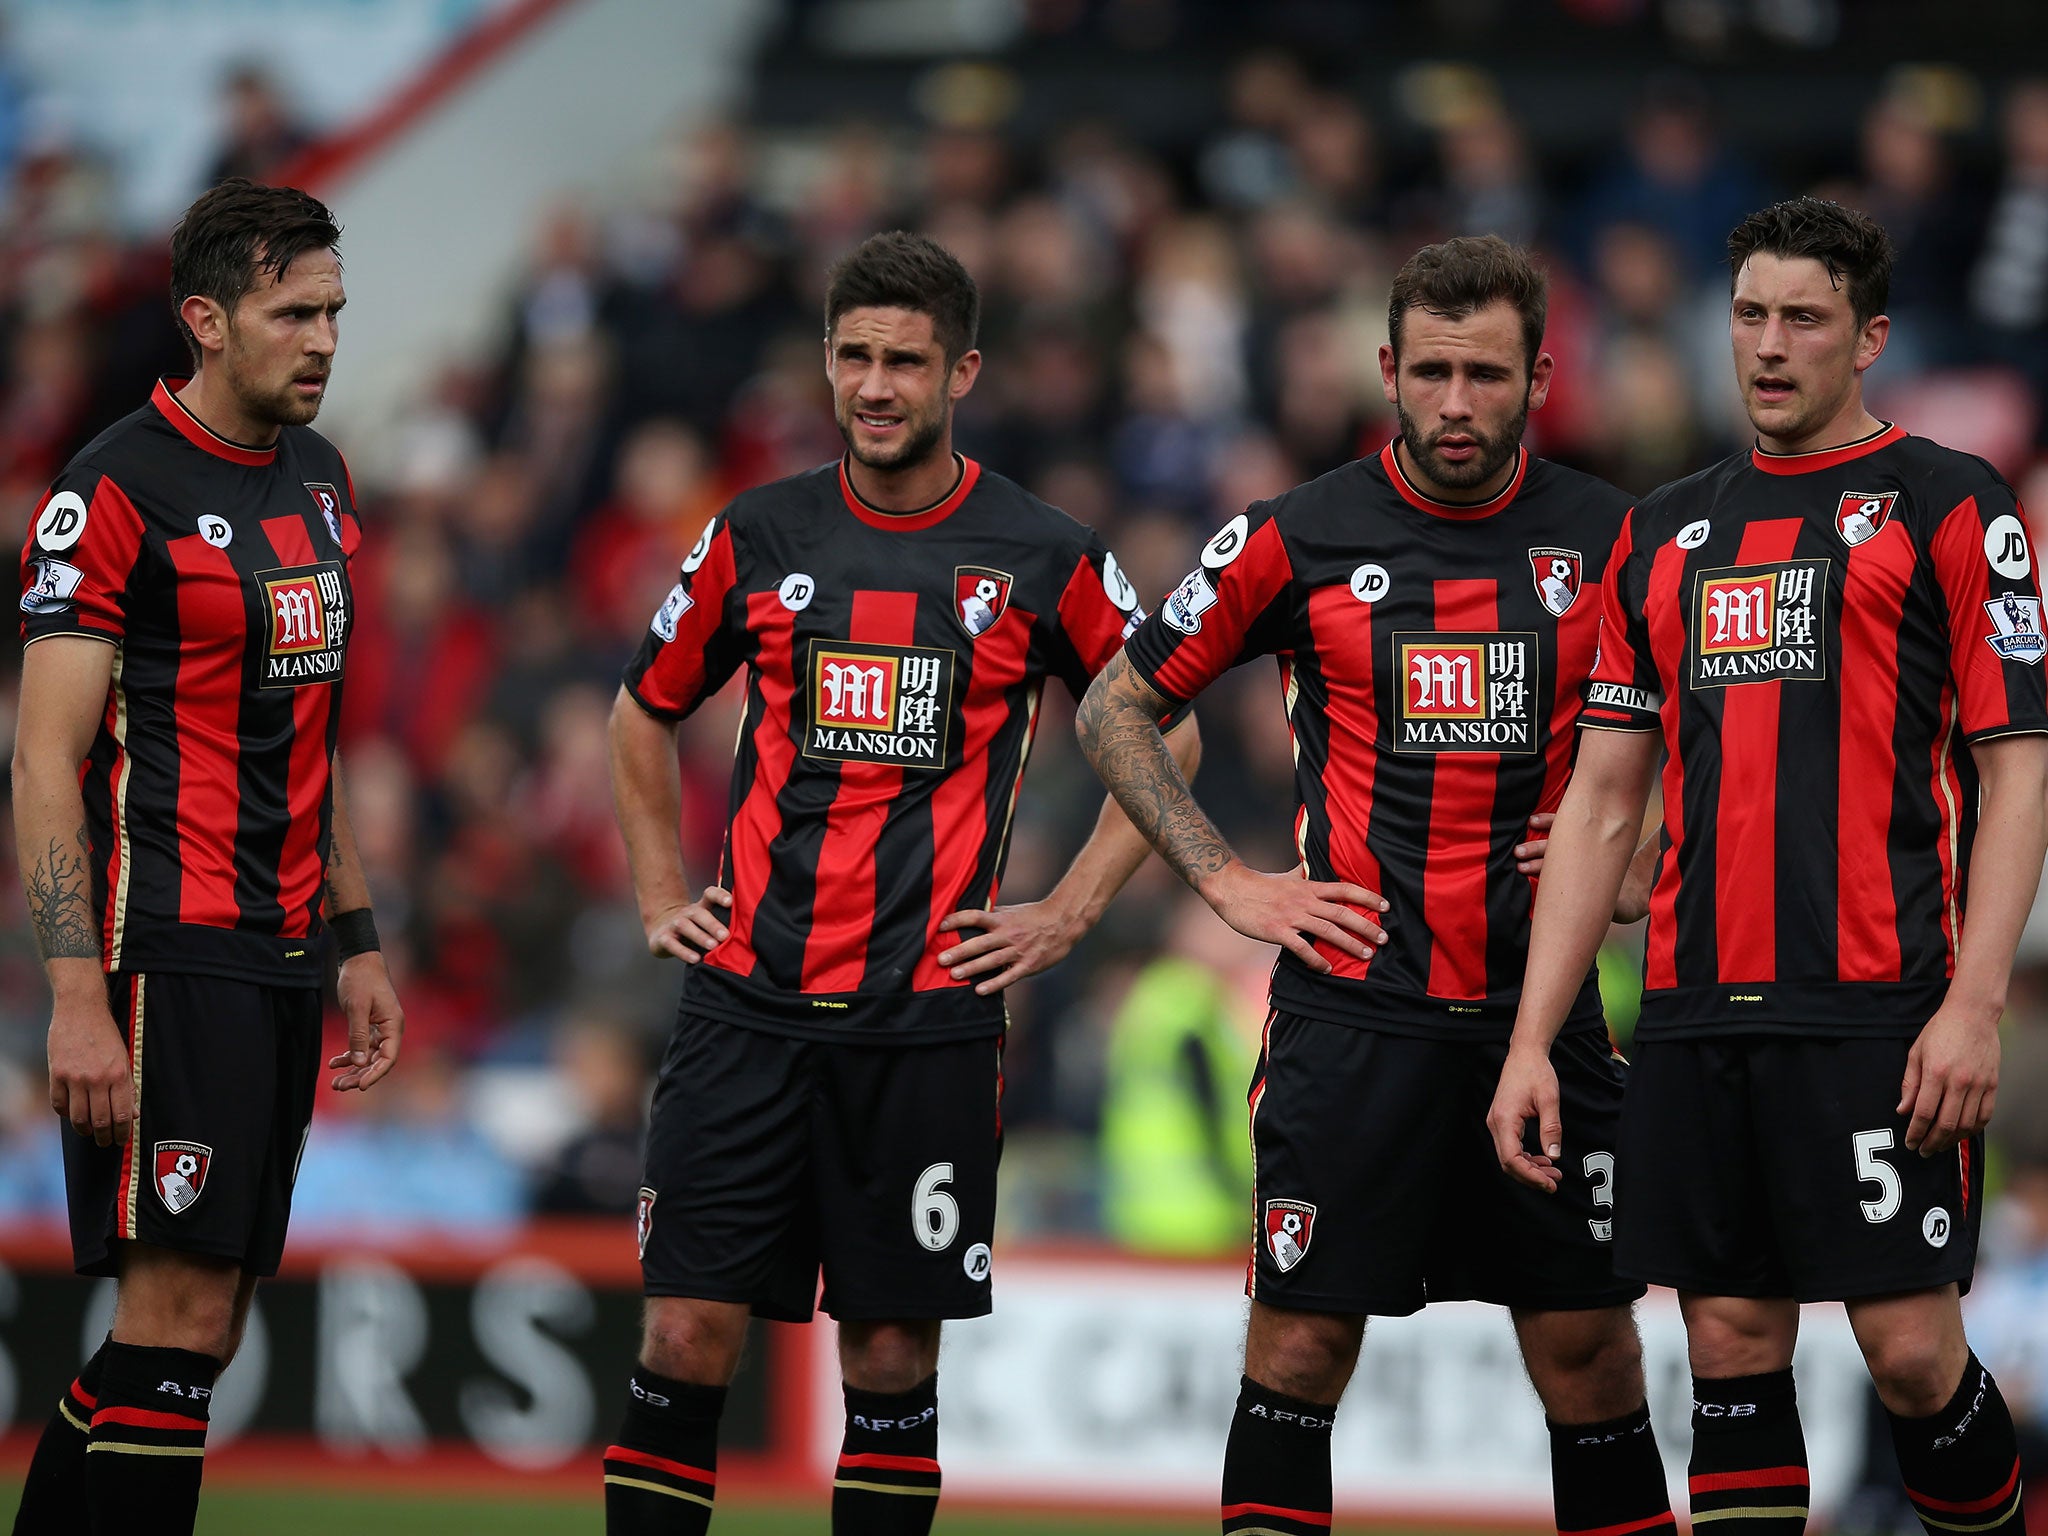 Bournemouth are struggling to find their feet this season